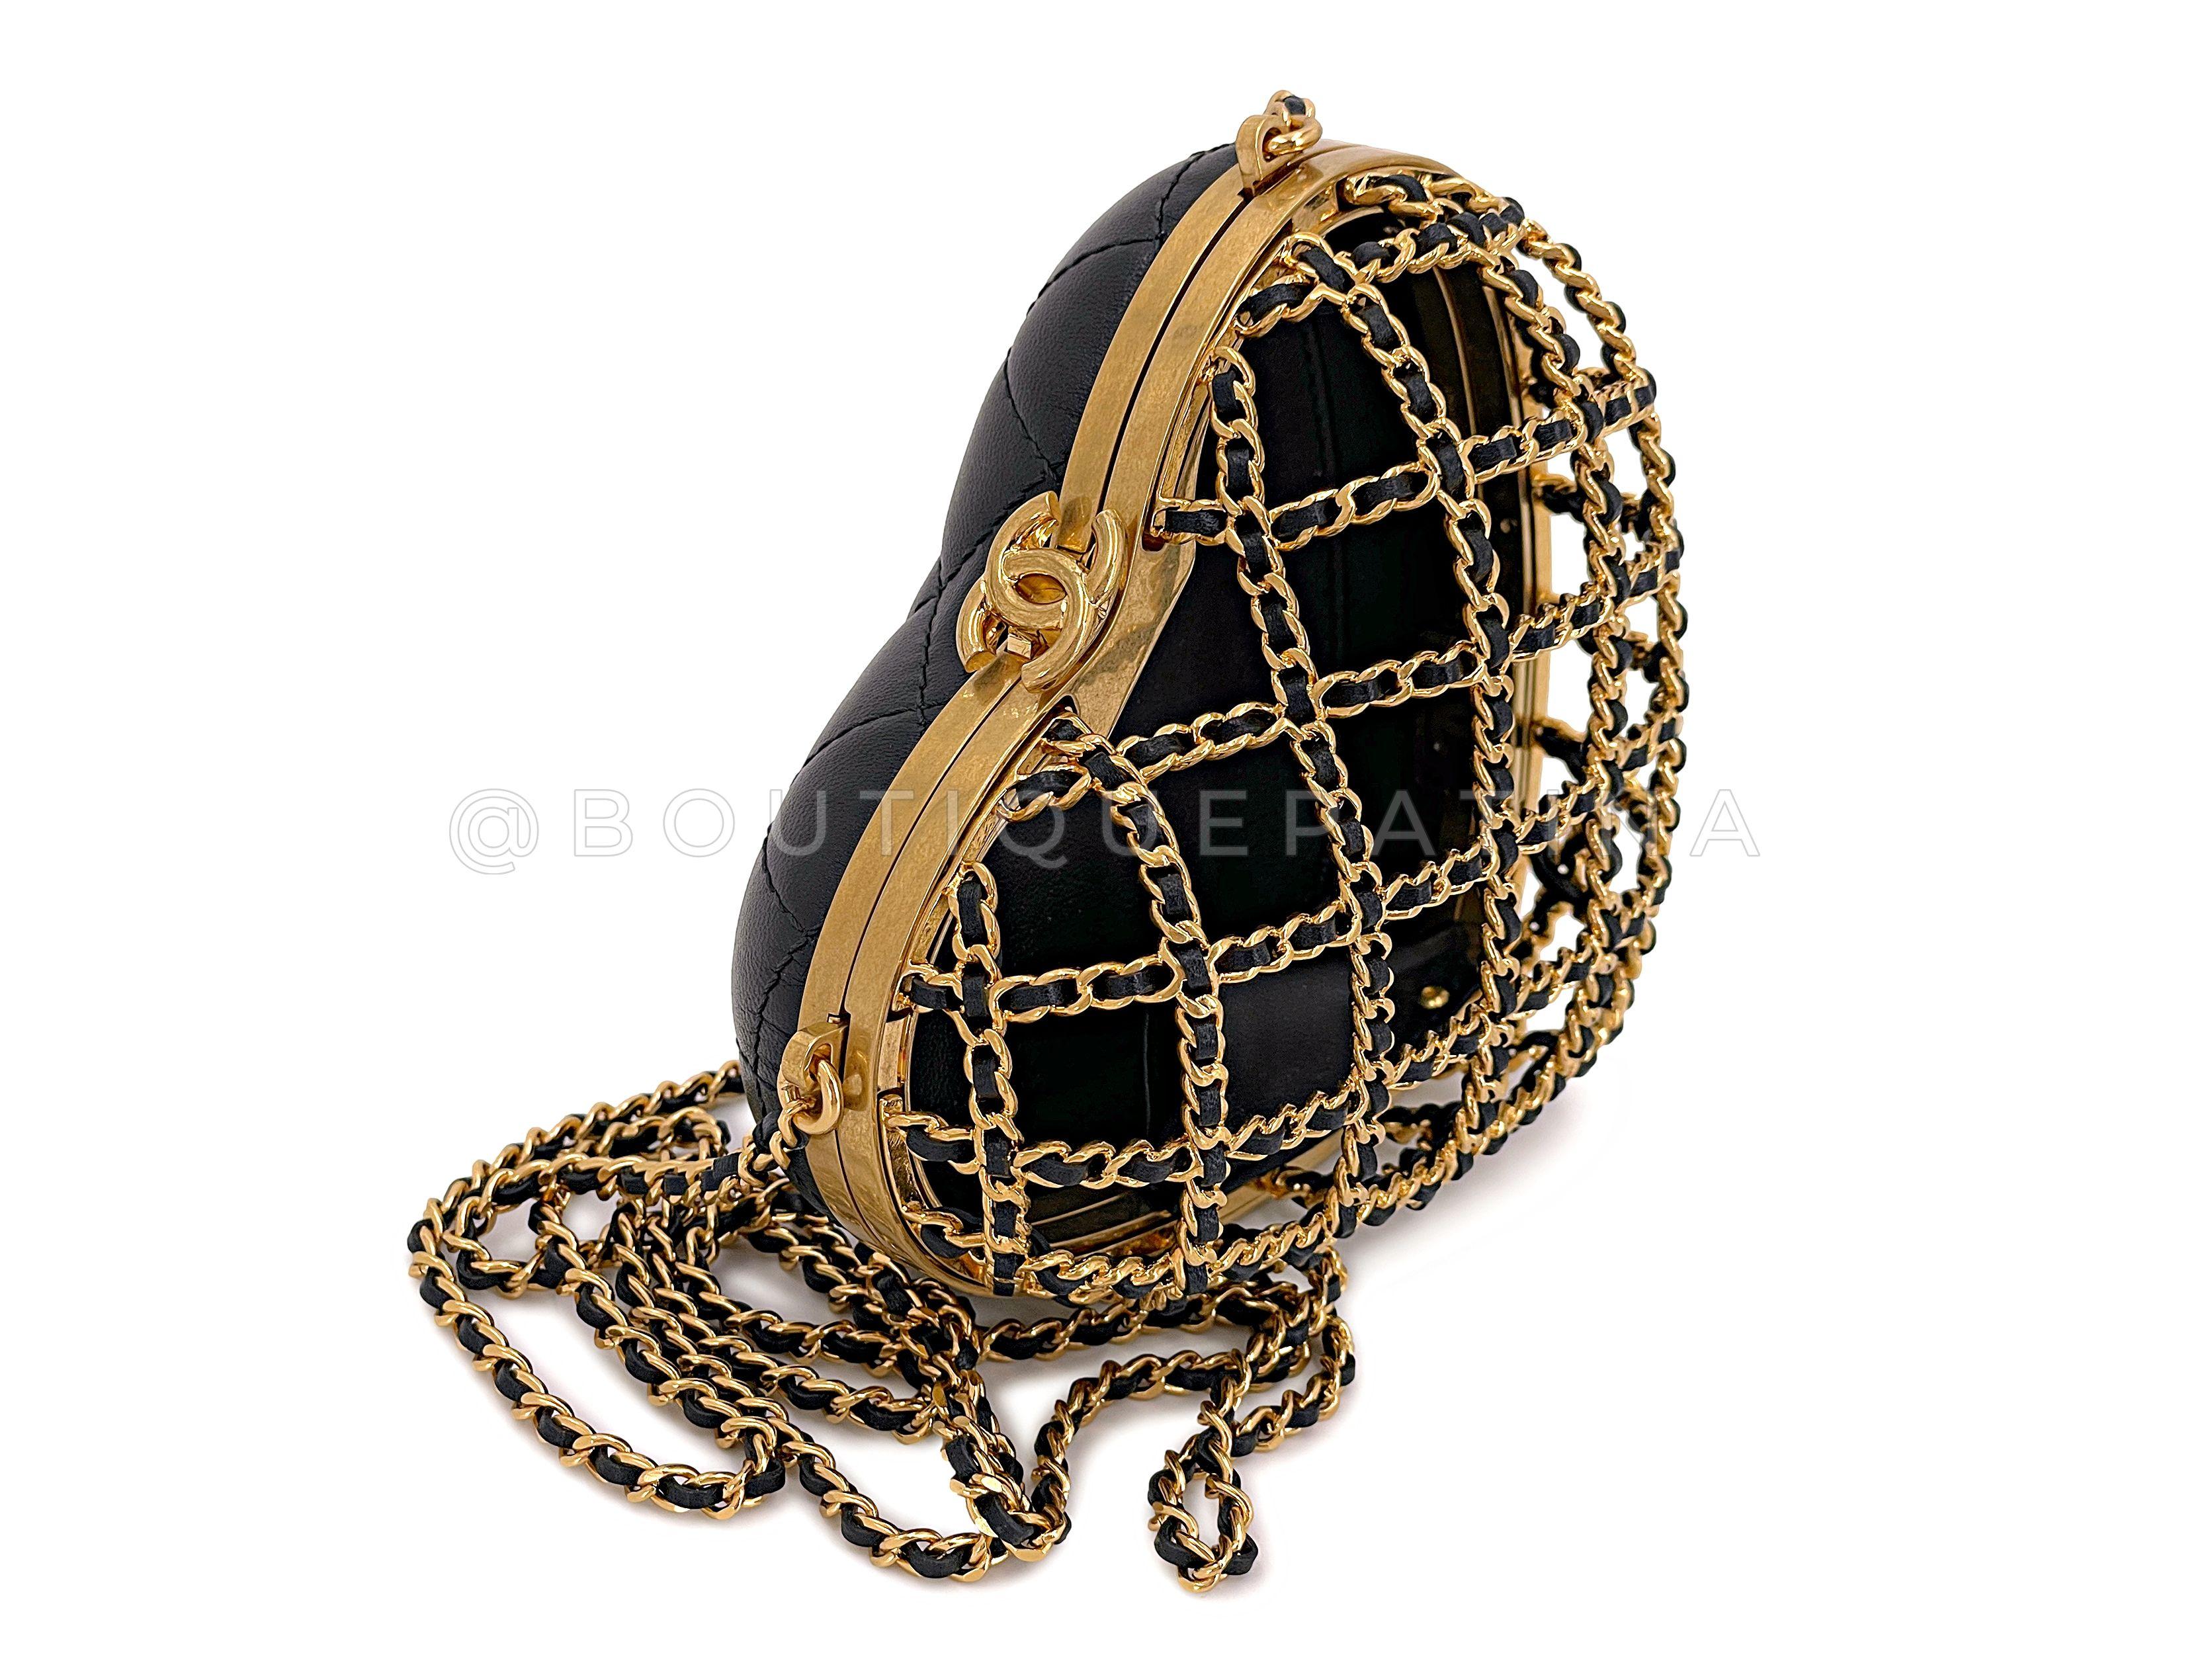 NIB 23S Chanel Caged Heart Minaudière Evening Clutch Bag Gold Black 67194 In New Condition For Sale In Costa Mesa, CA